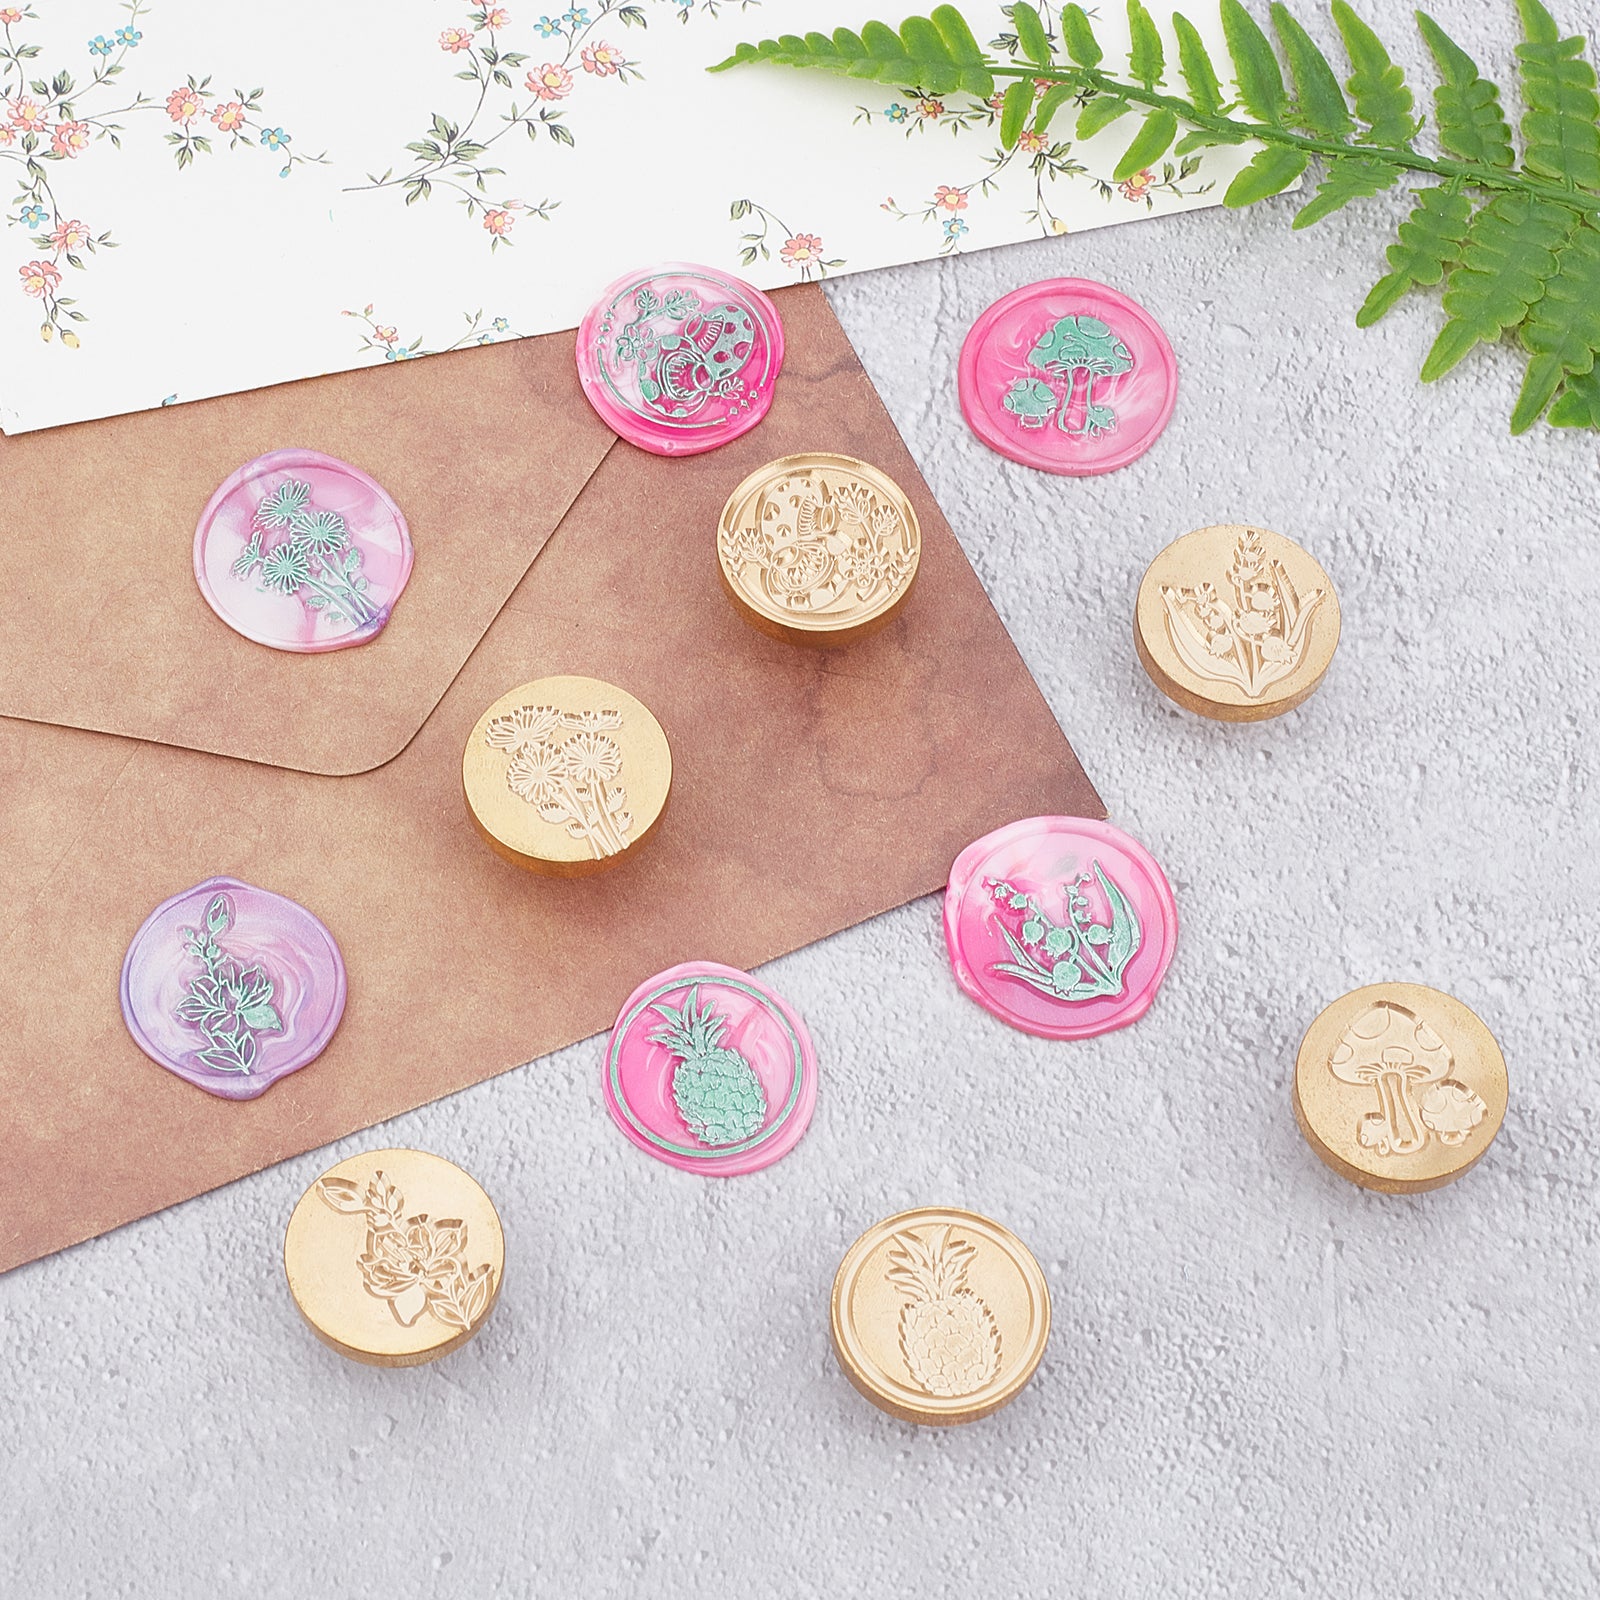 Wax Stamps, Wax Seal Stamps